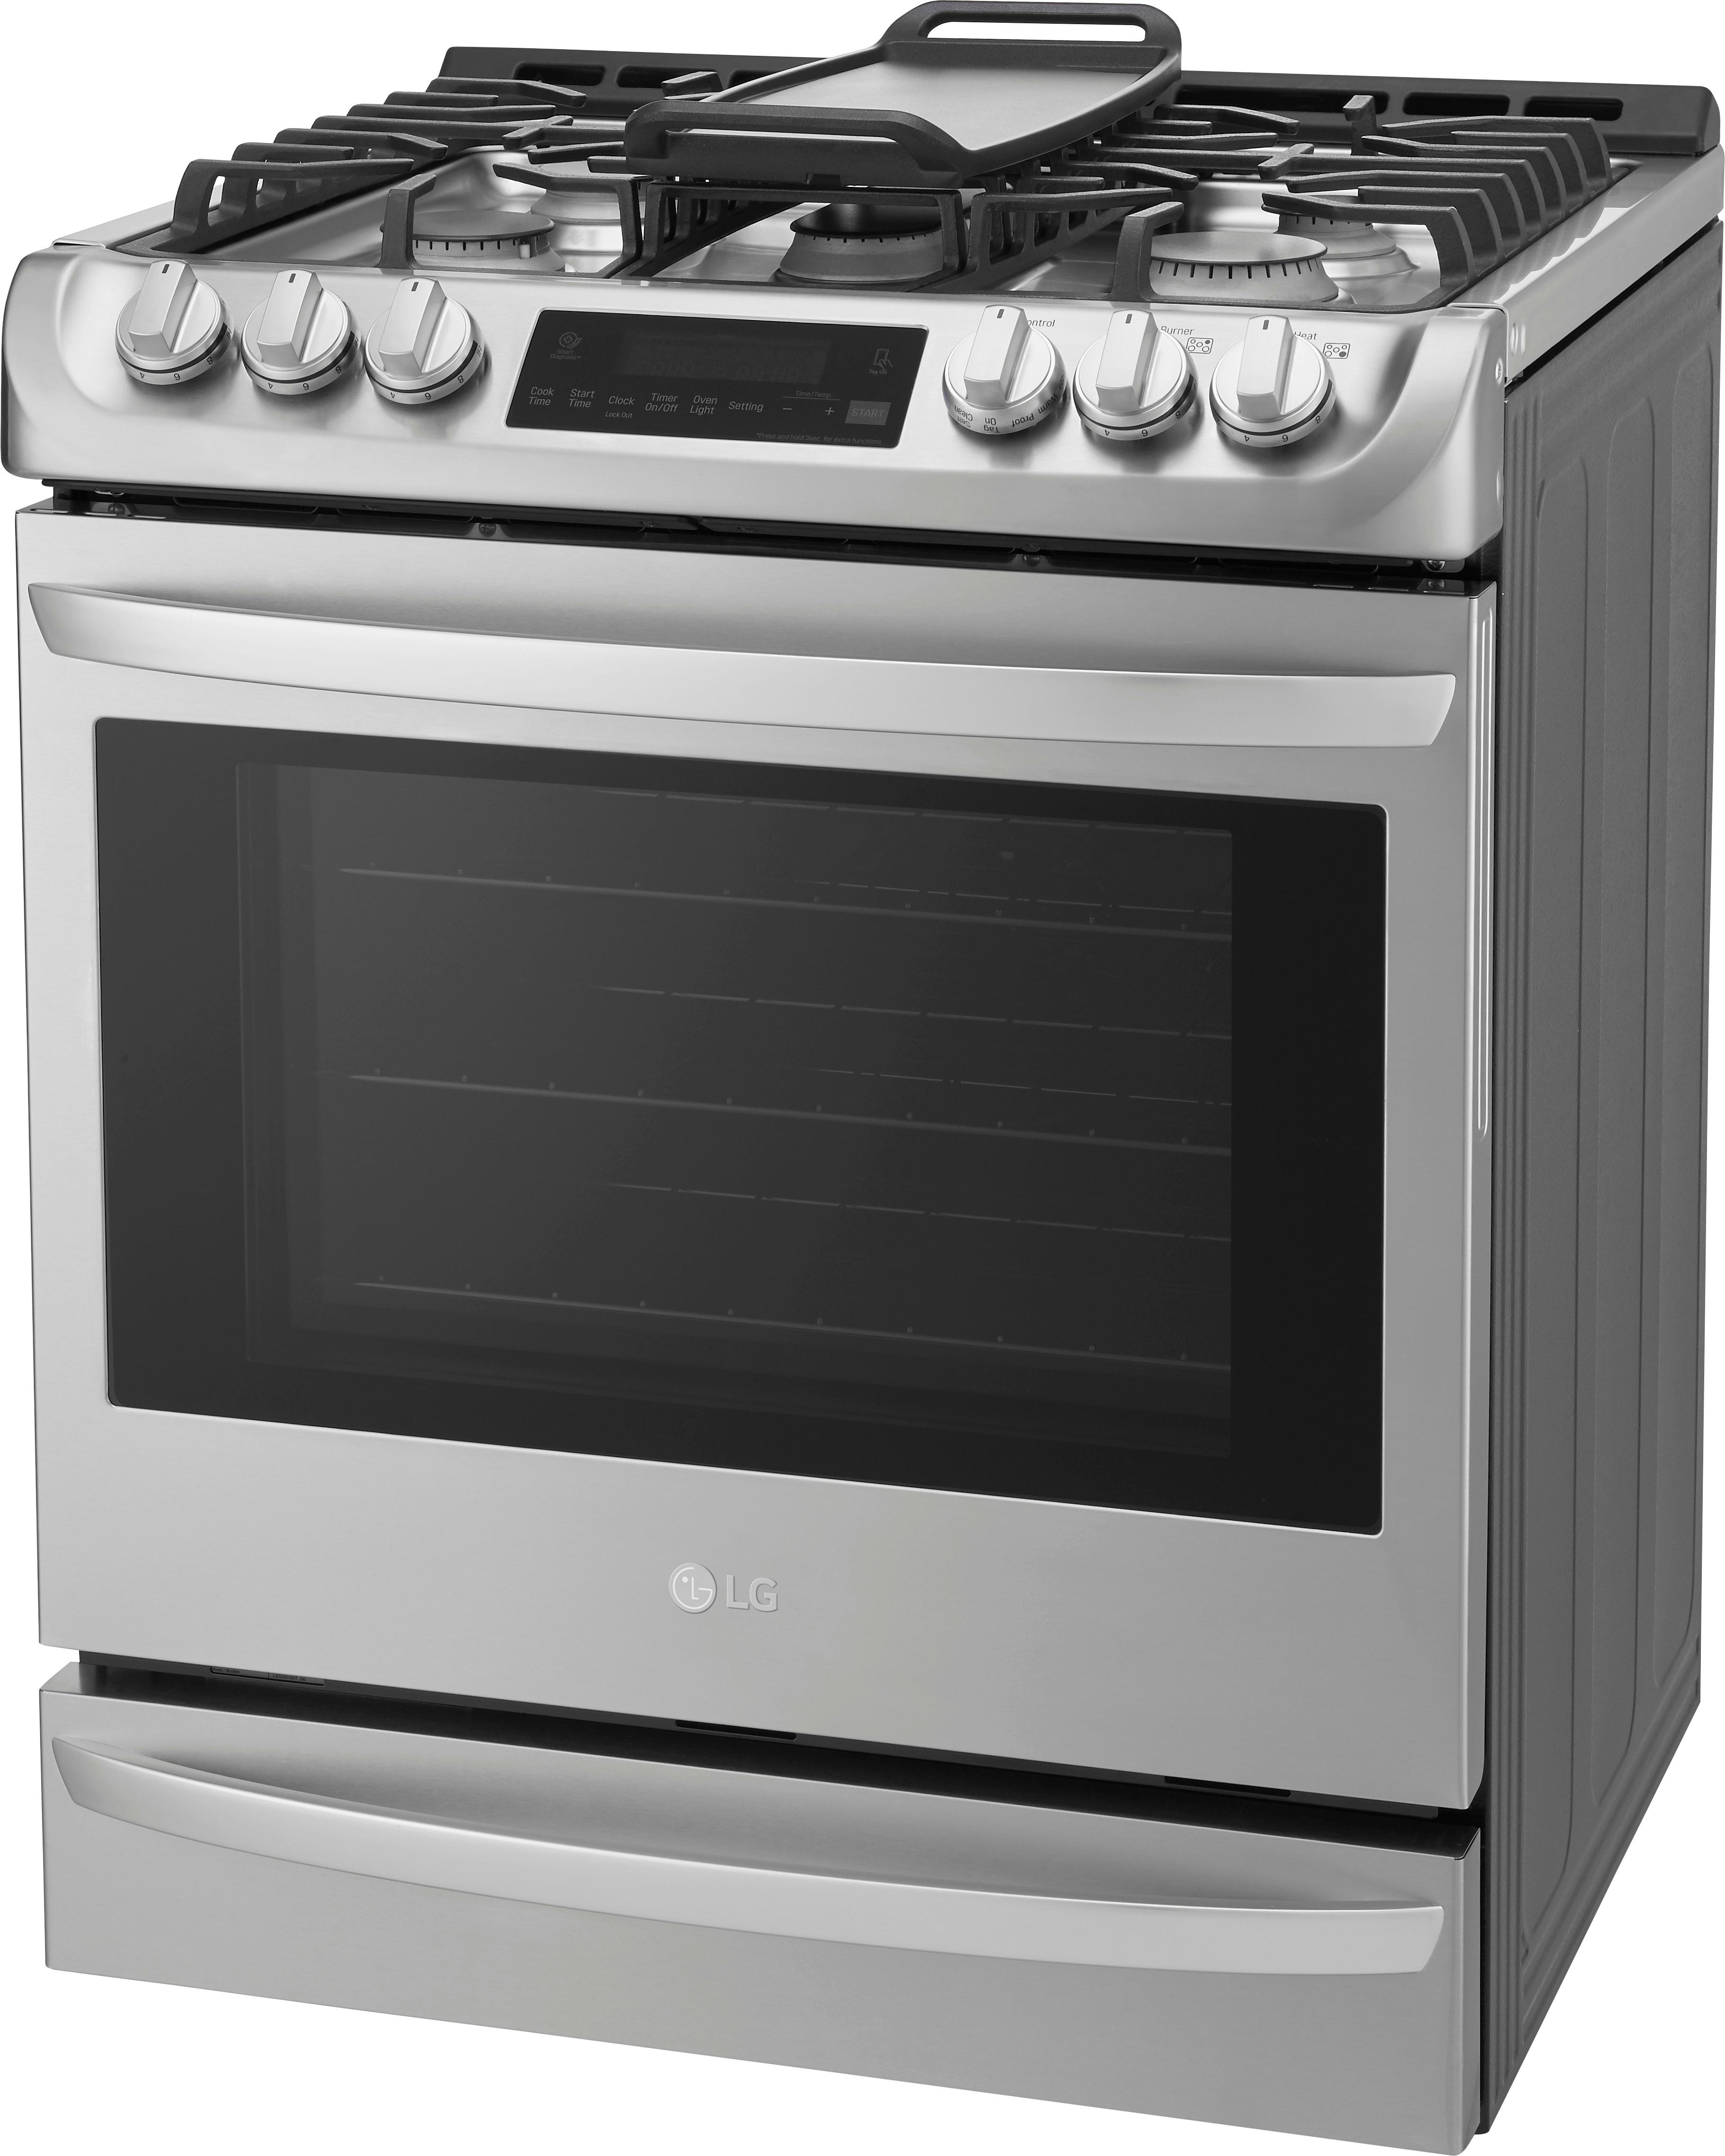 Left View: LG - 6.3 Cu. Ft. Self-Cleaning Slide-In Gas Range with ProBake Convection - Stainless steel